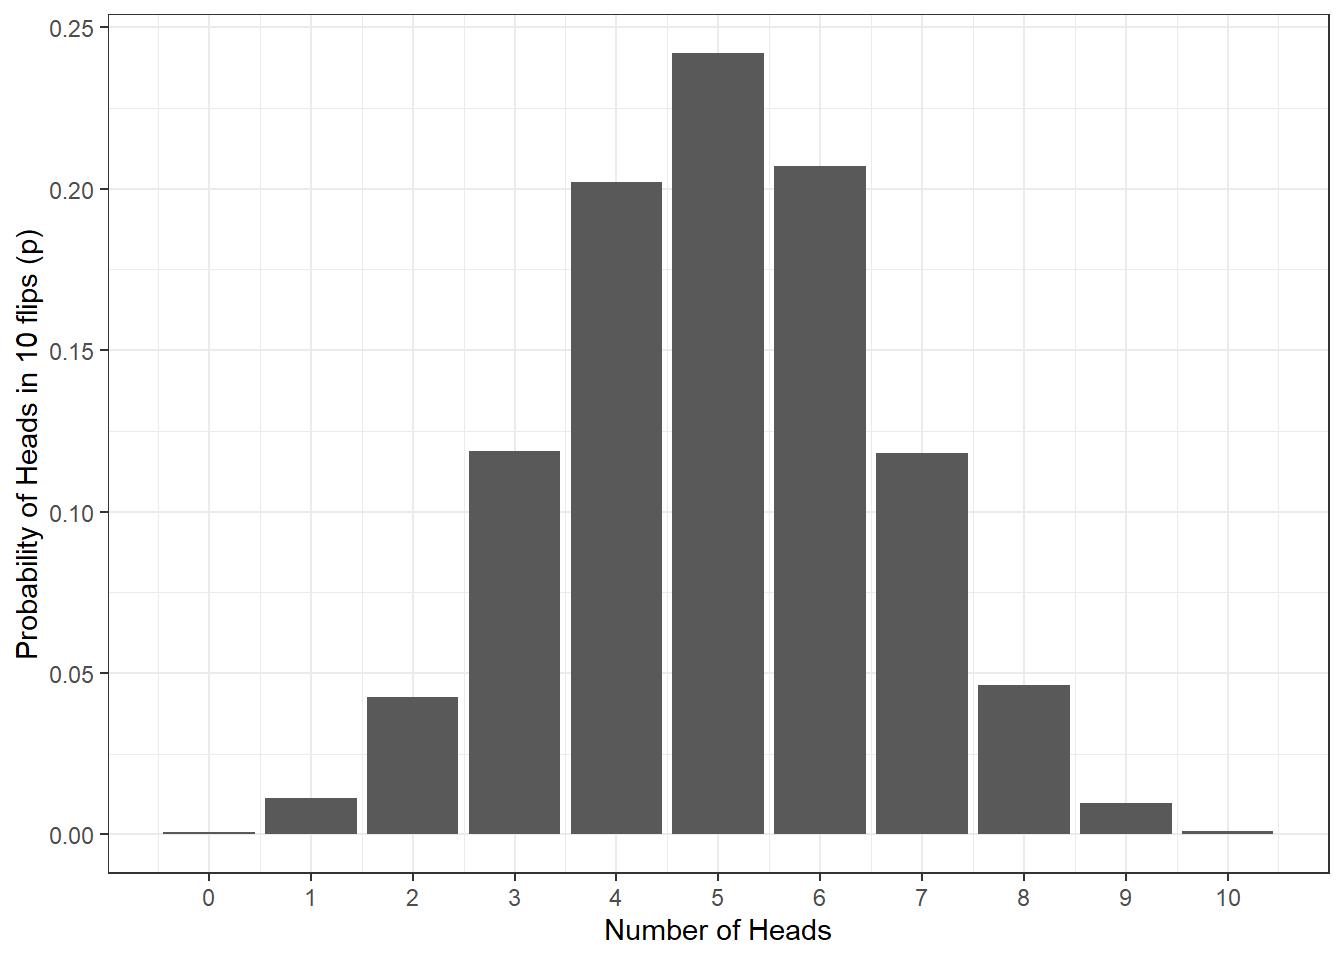 Probability of no. of heads from 10 coin tosses